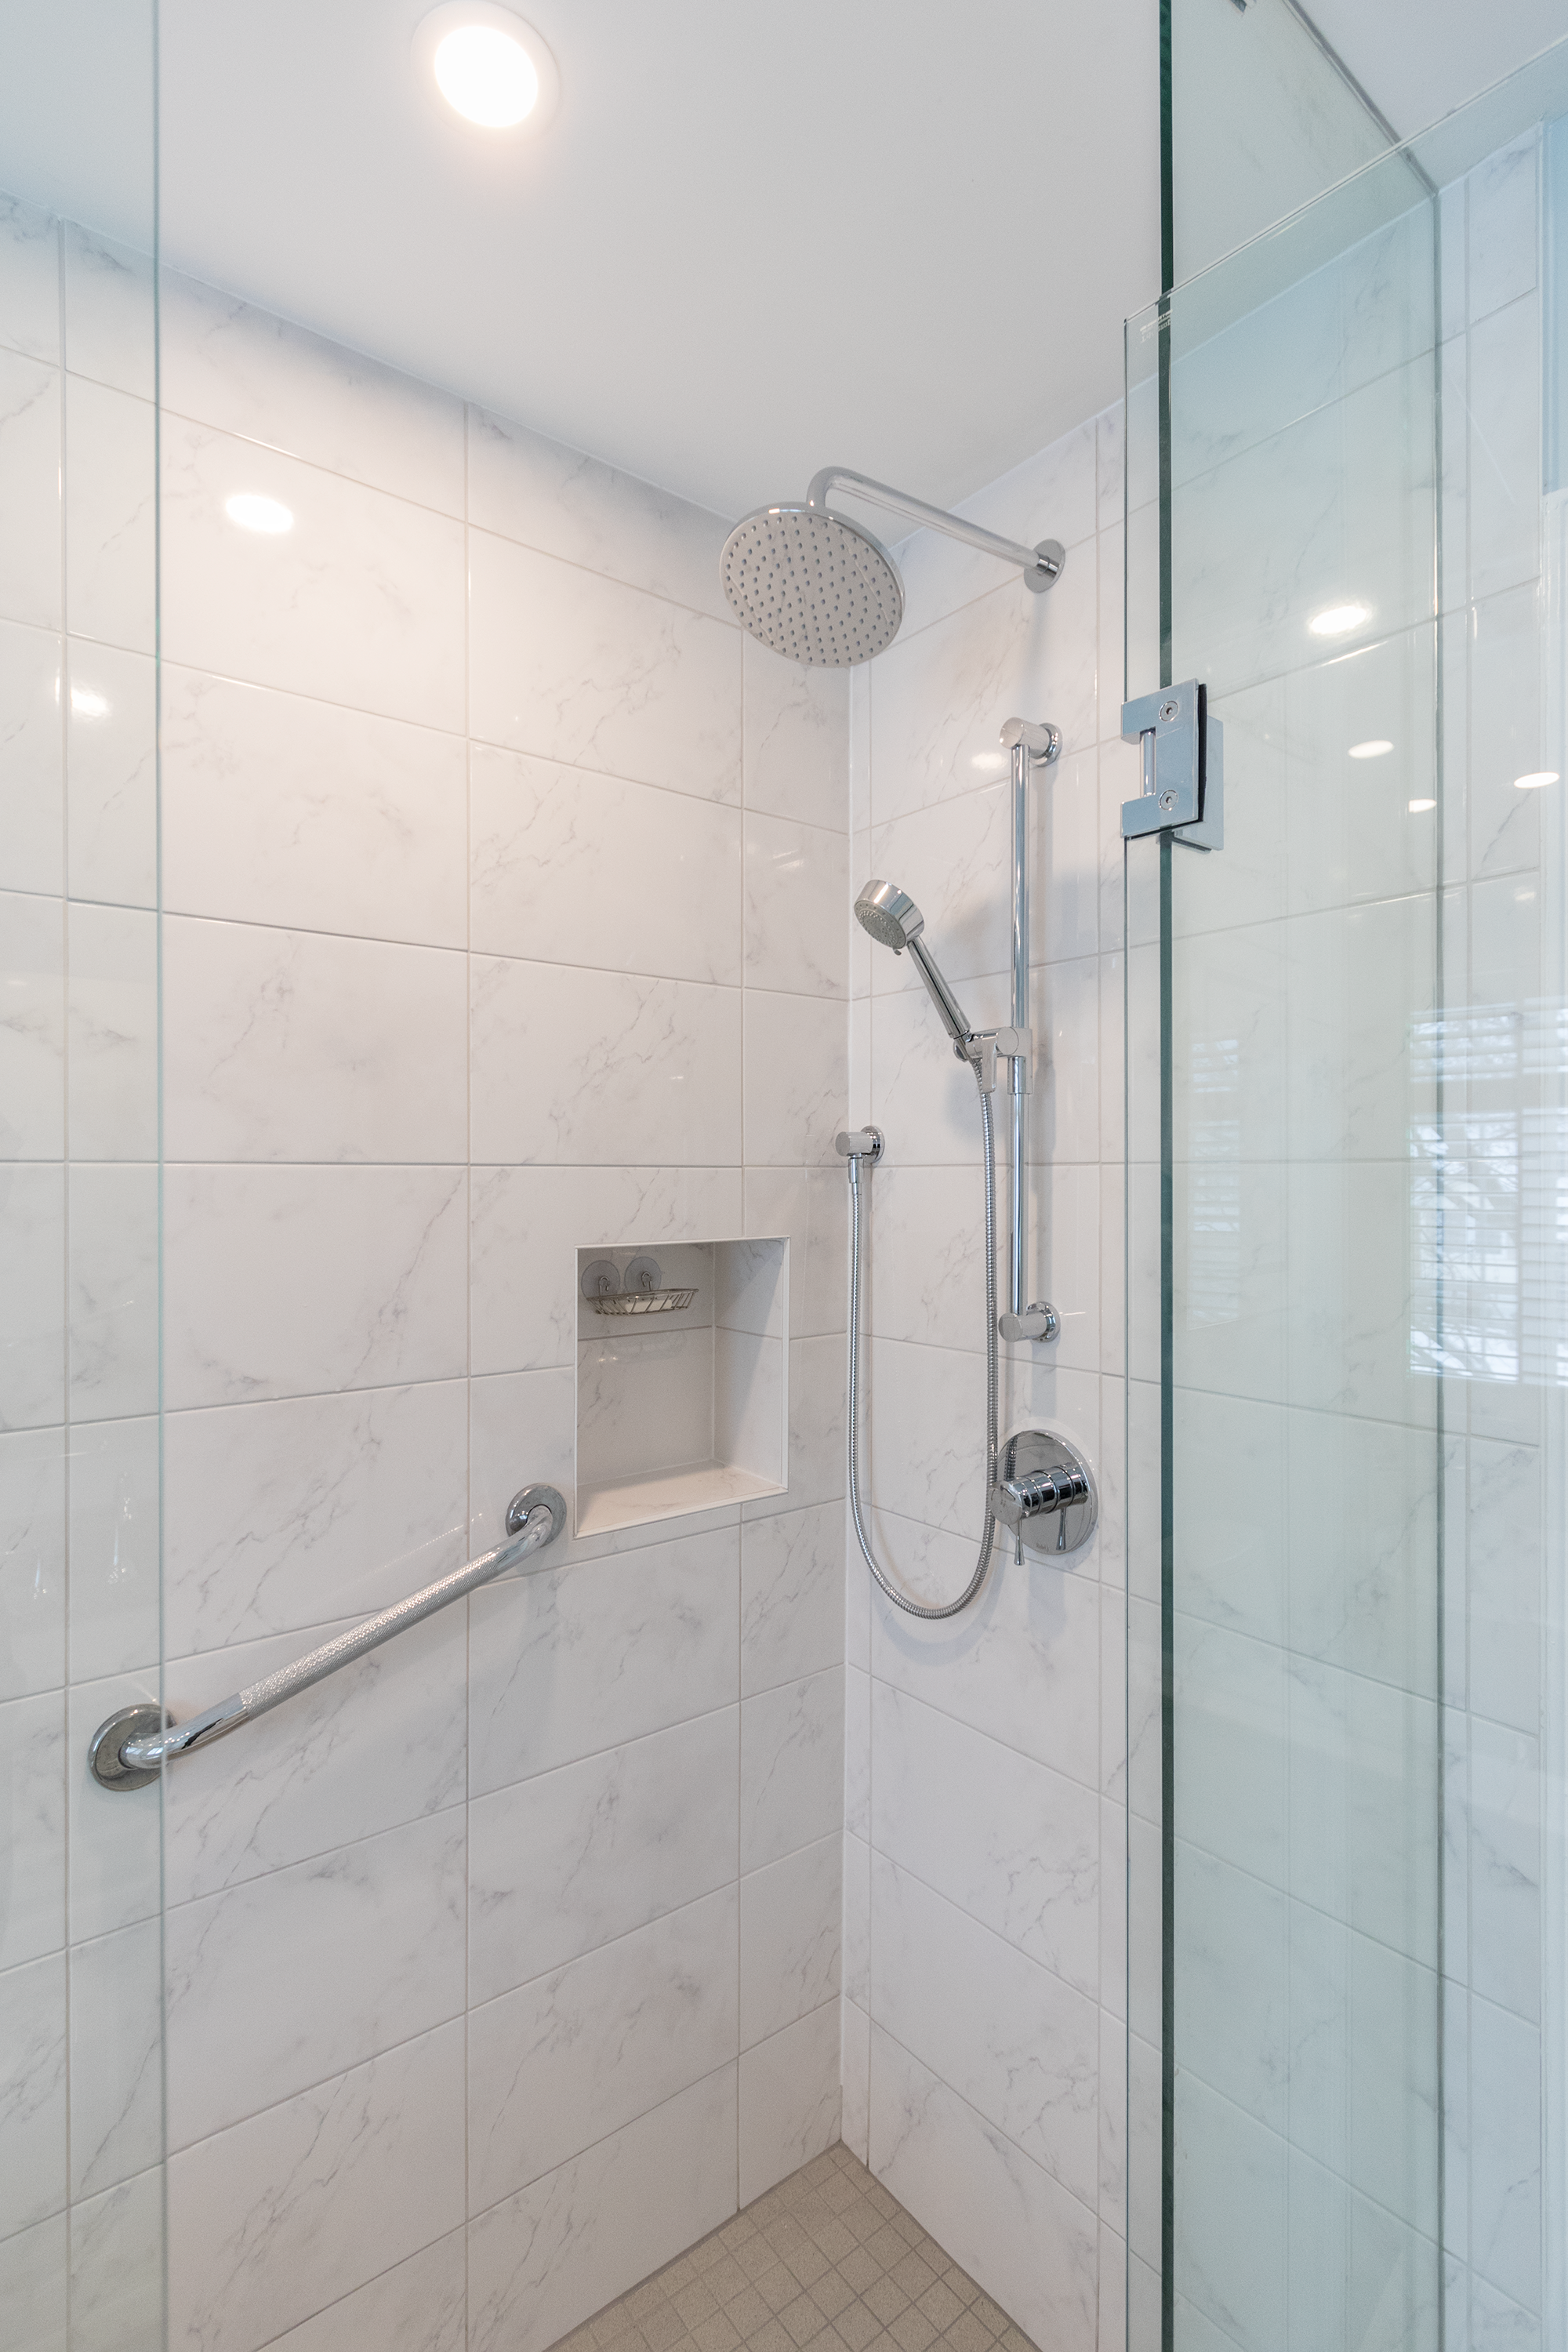 Converting Your Tub To A Walk In Shower, How Much To Replace Bathtub With Walk In Shower